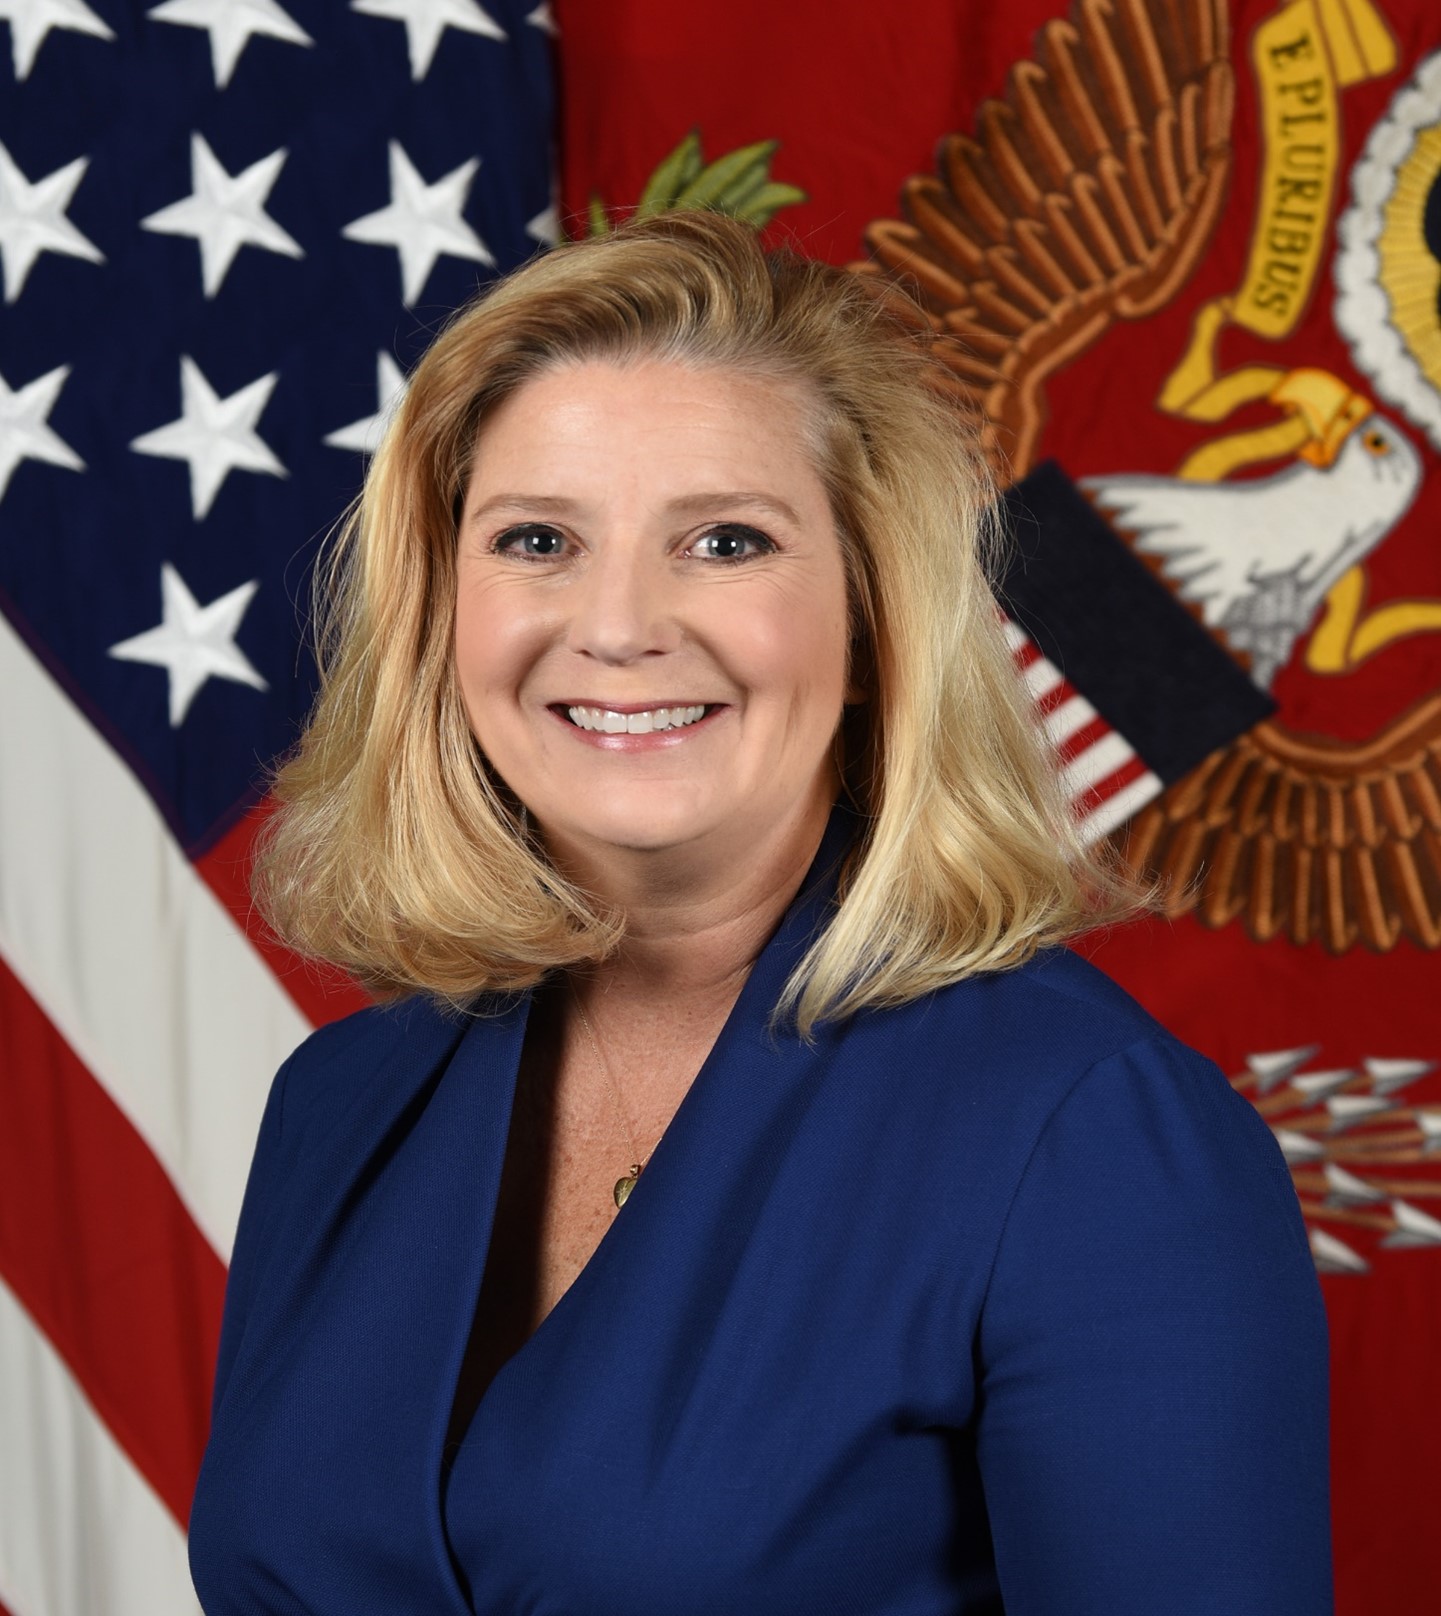 Acting Secretary of the Army